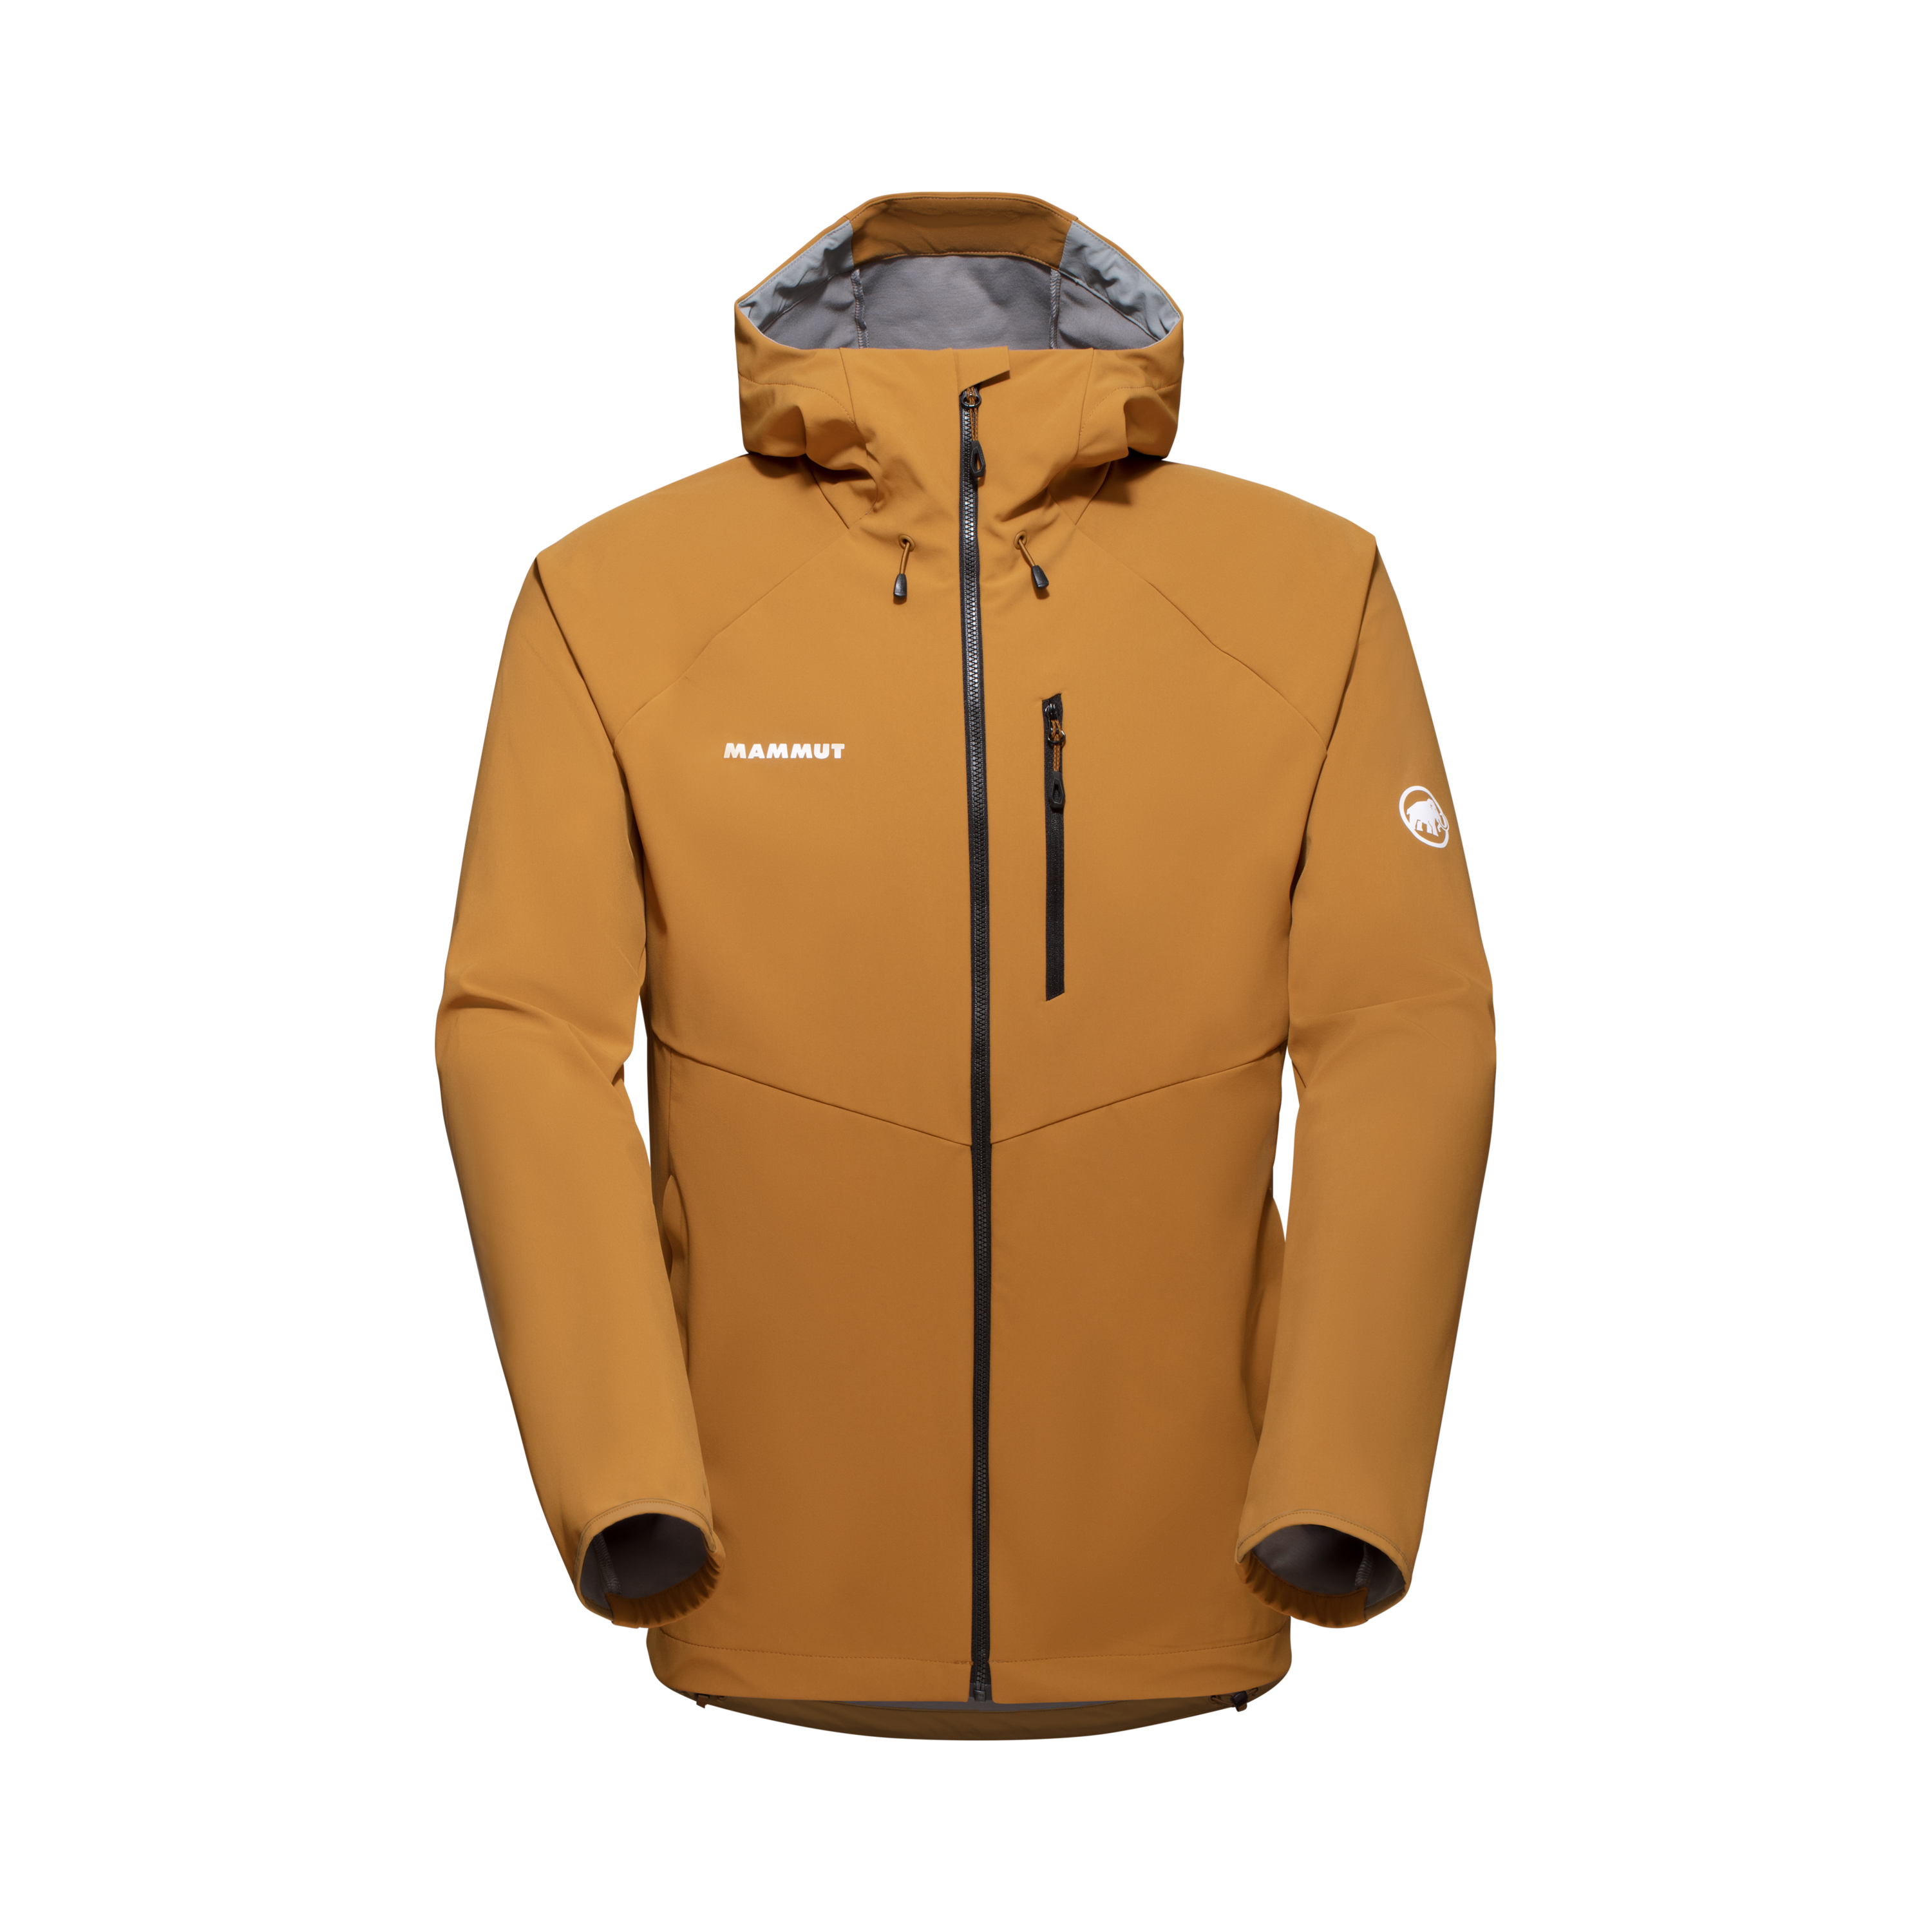 Men's Outdoor Jackets and Vests | Mammut